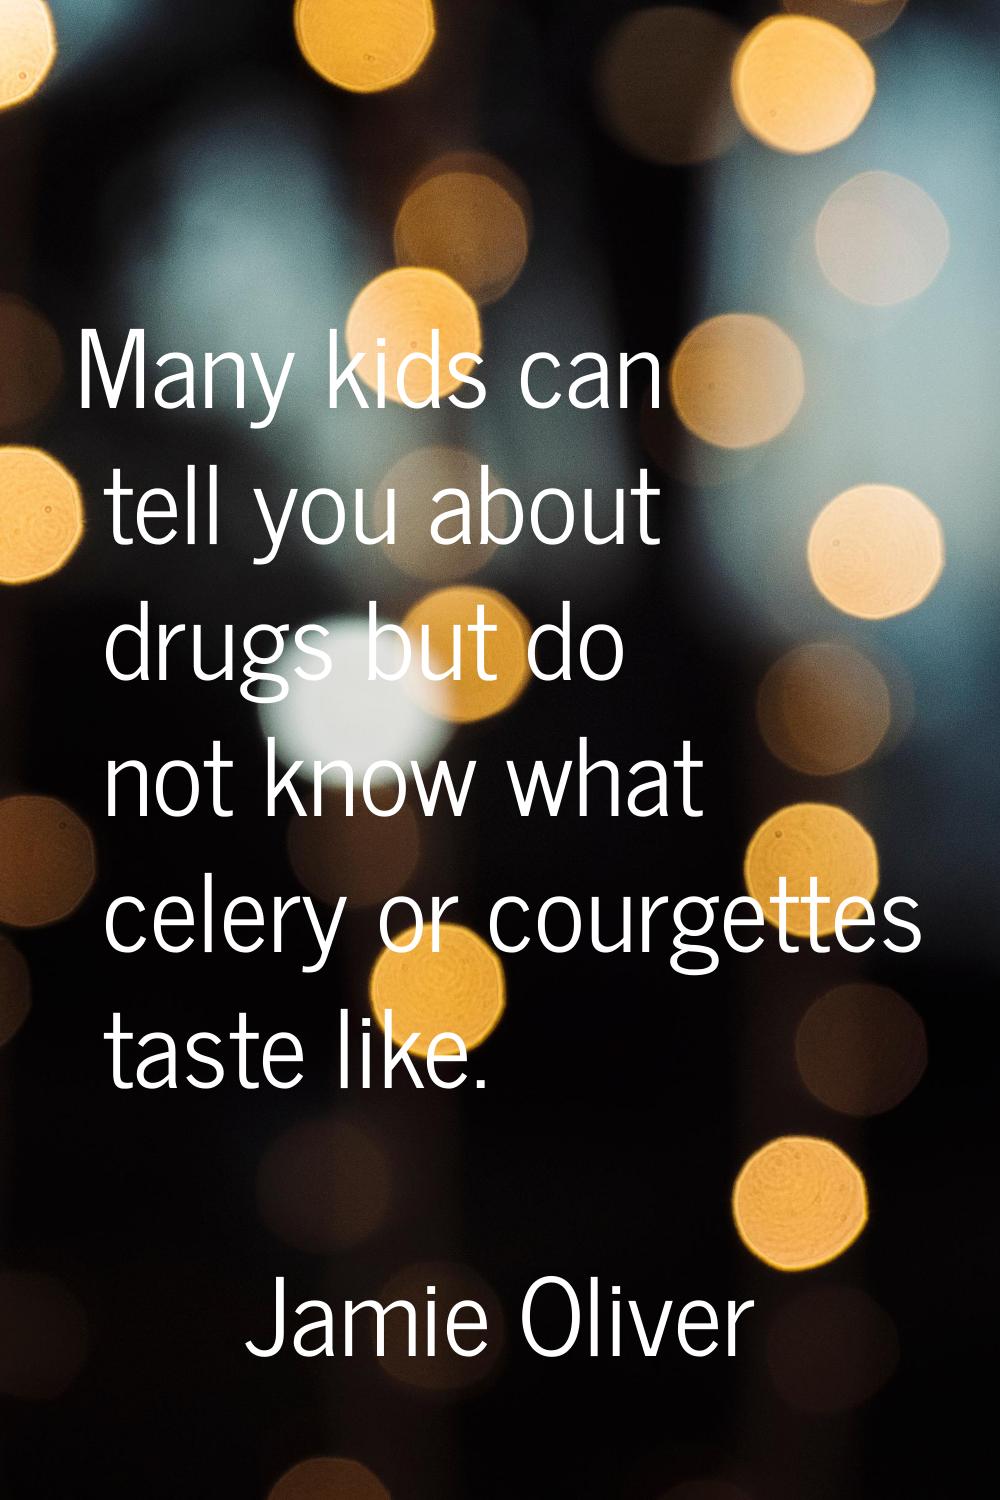 Many kids can tell you about drugs but do not know what celery or courgettes taste like.